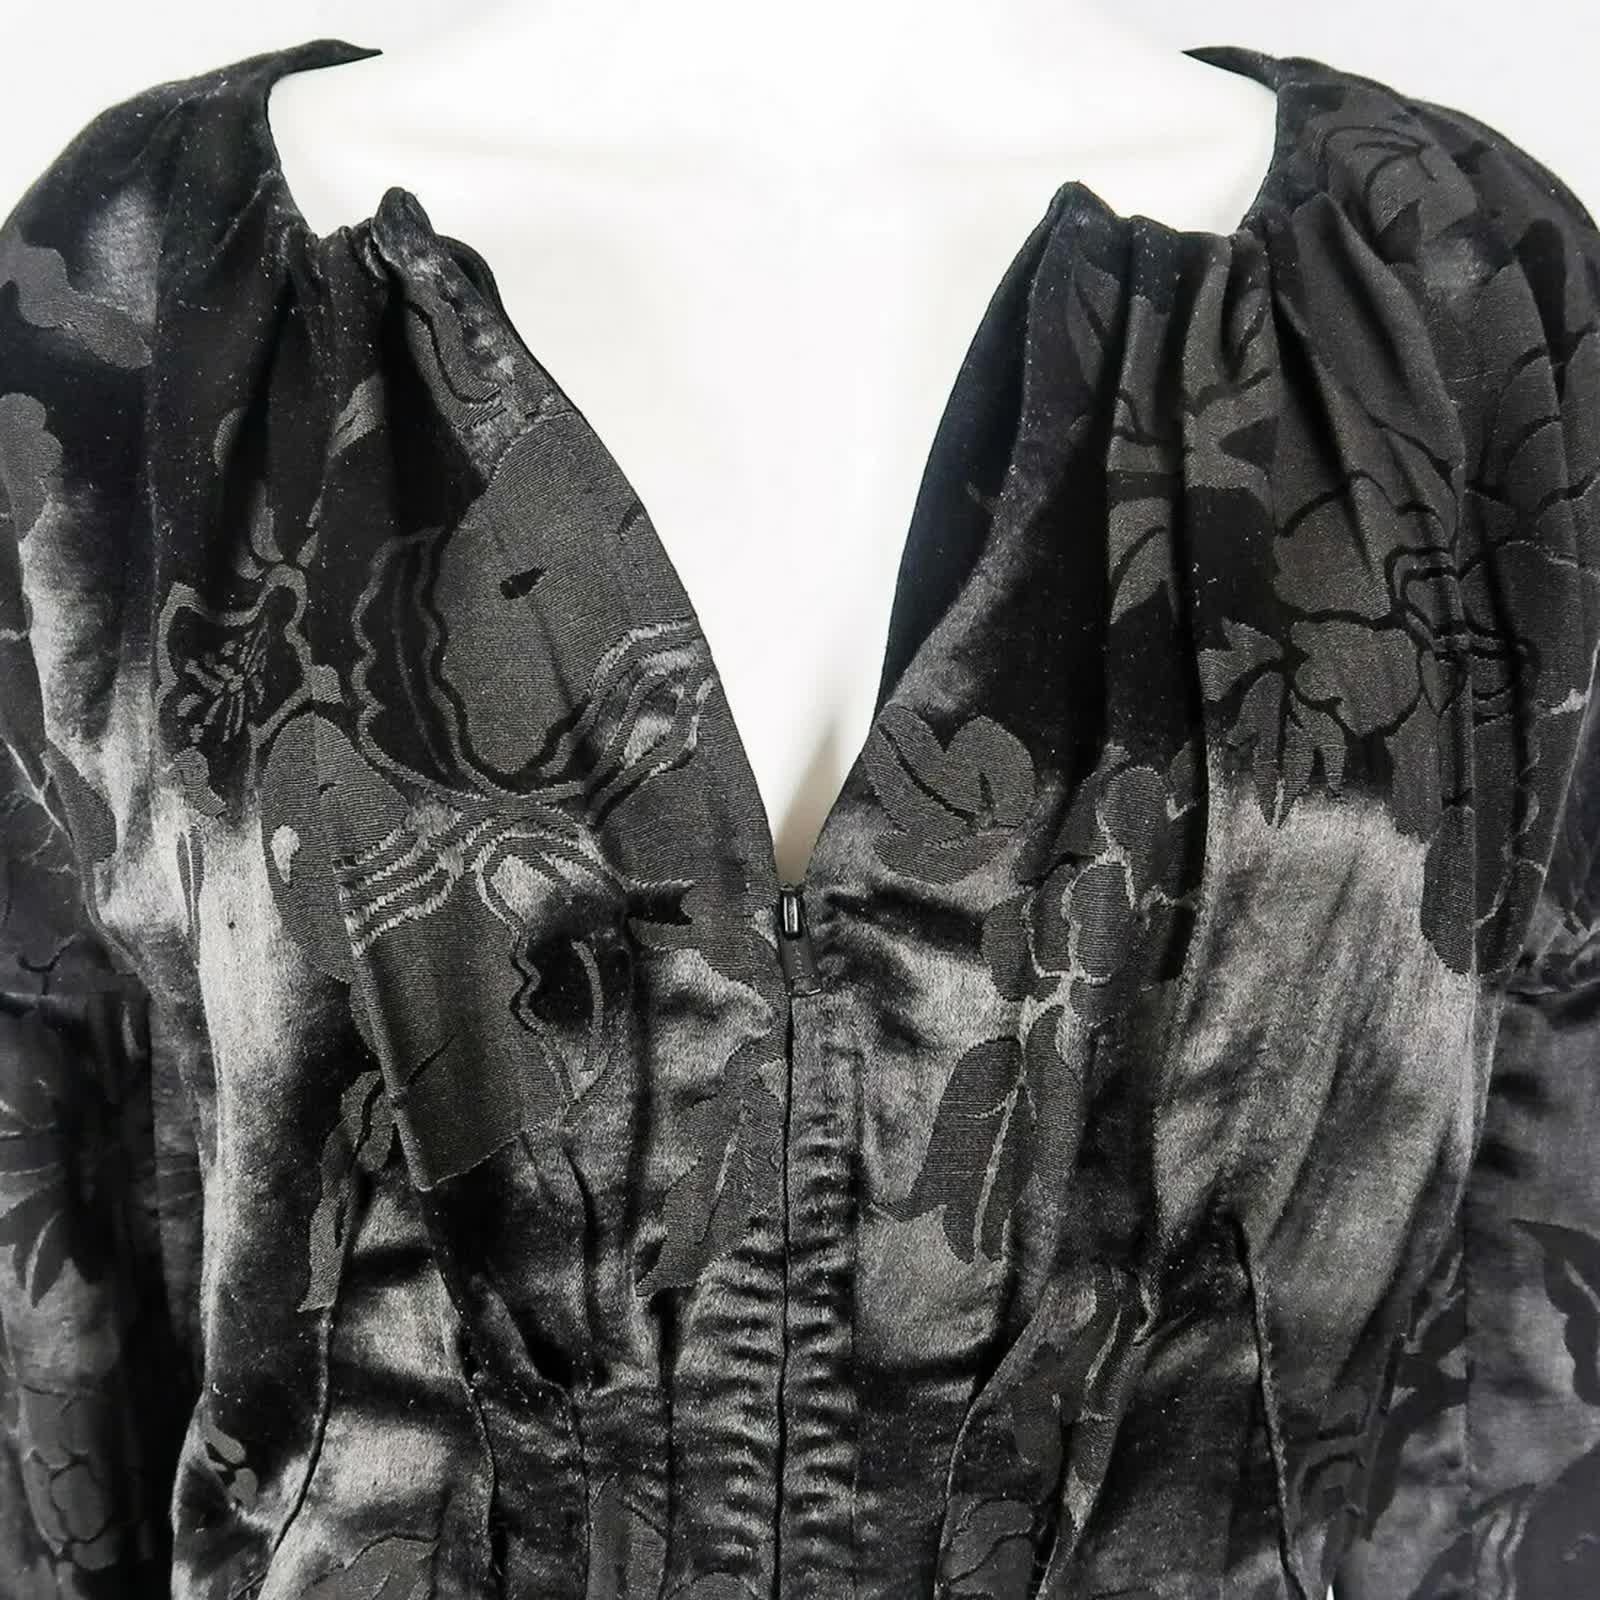 Women's S/S 2002 Gucci Black Silk Jacket with Floral accents Tom Ford Era